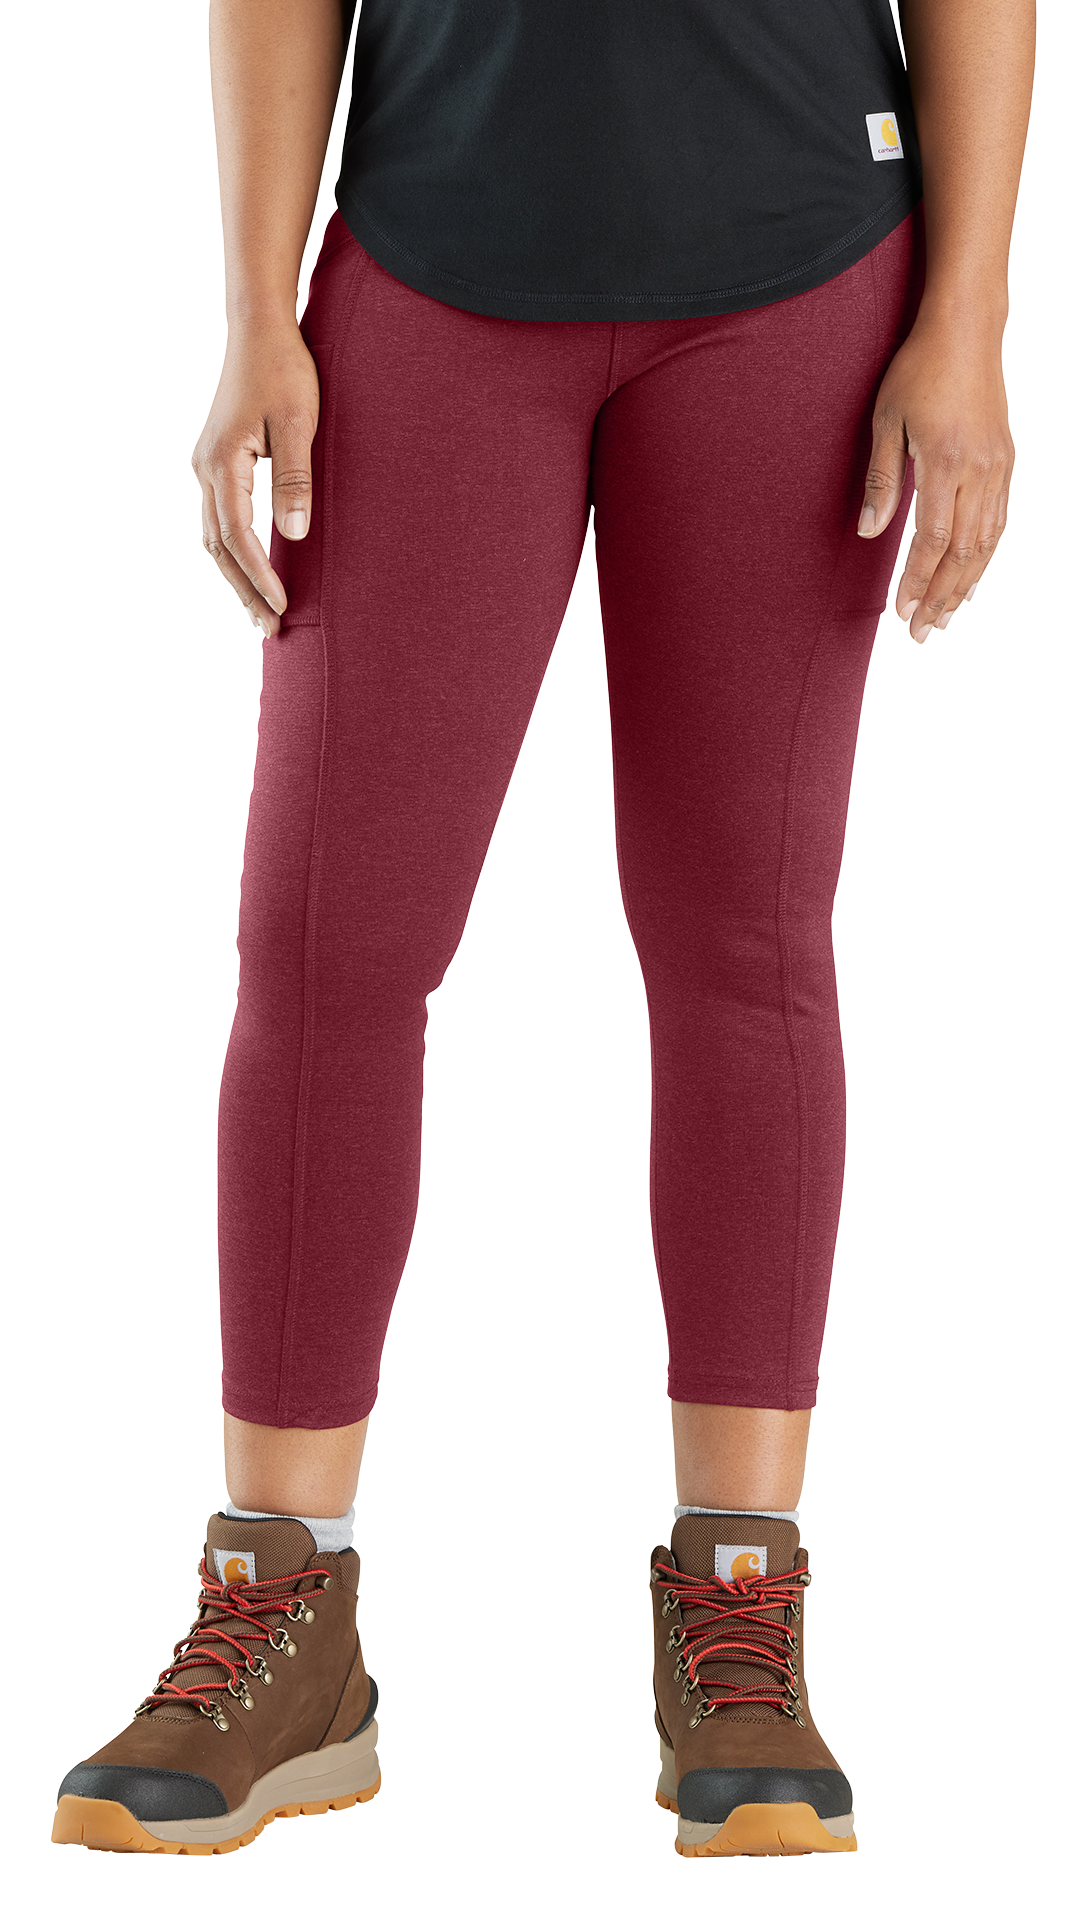 Carhartt womens Force Fitted Lightweight Ankle Length (Plus Size) Leggings,  Tarmac, X-Large Plus